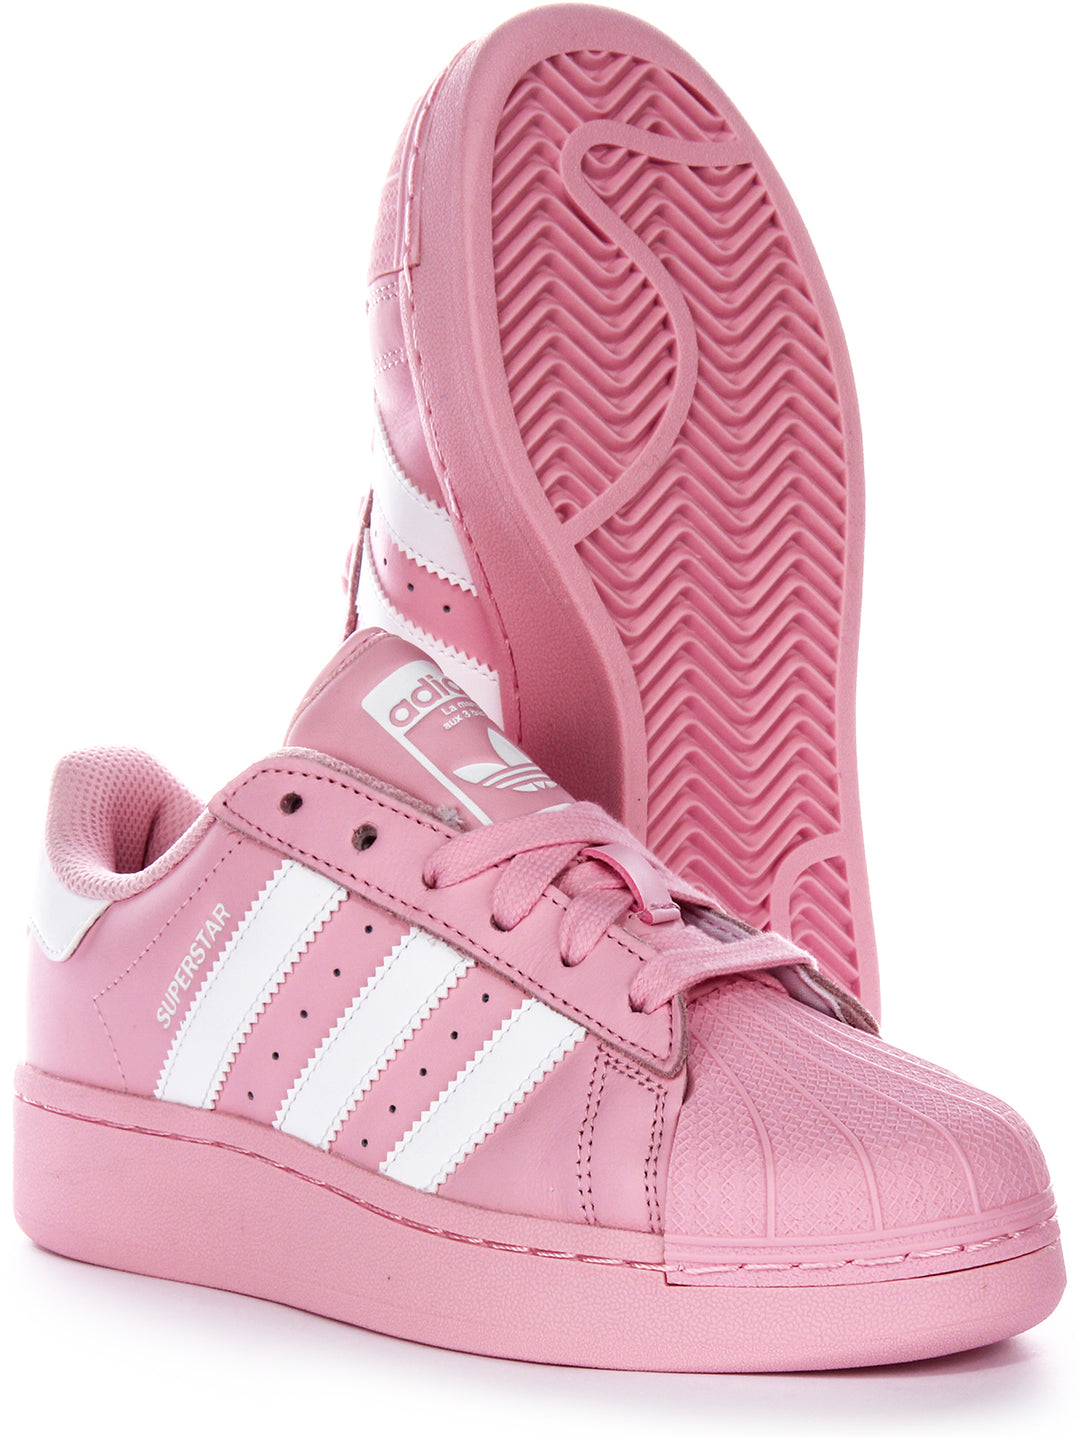 Adidas Superstar XLG In Pink White For Women